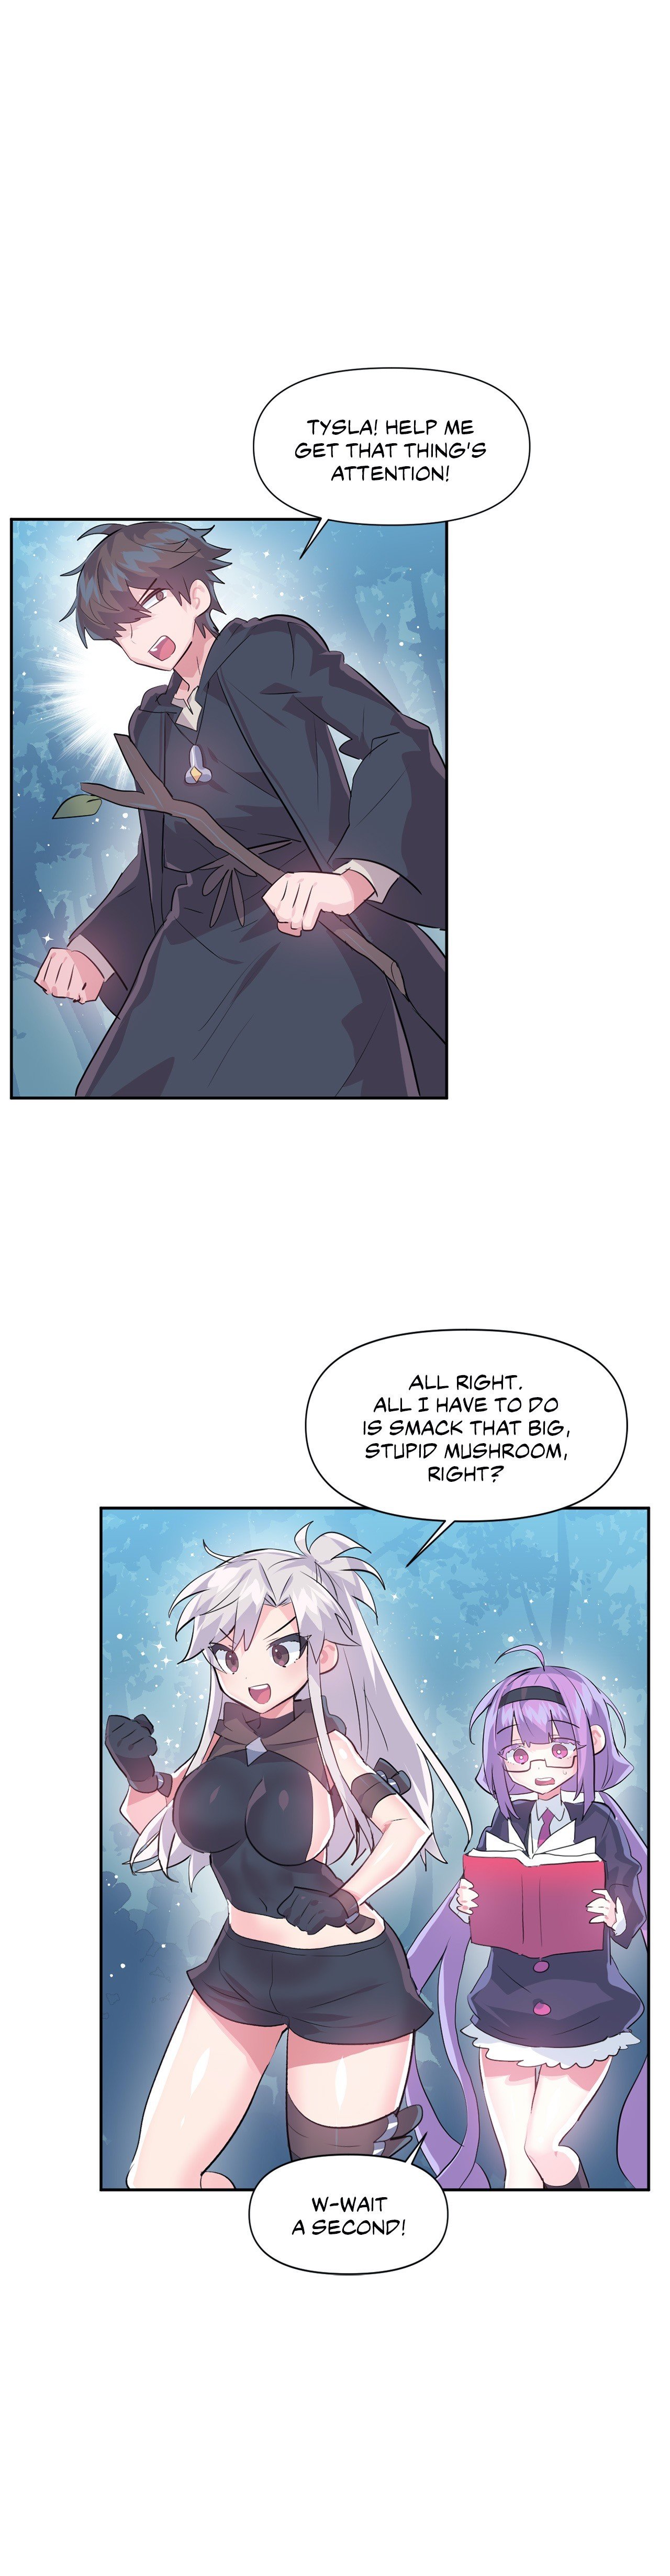 log-in-to-lust-a-land-chap-38-13